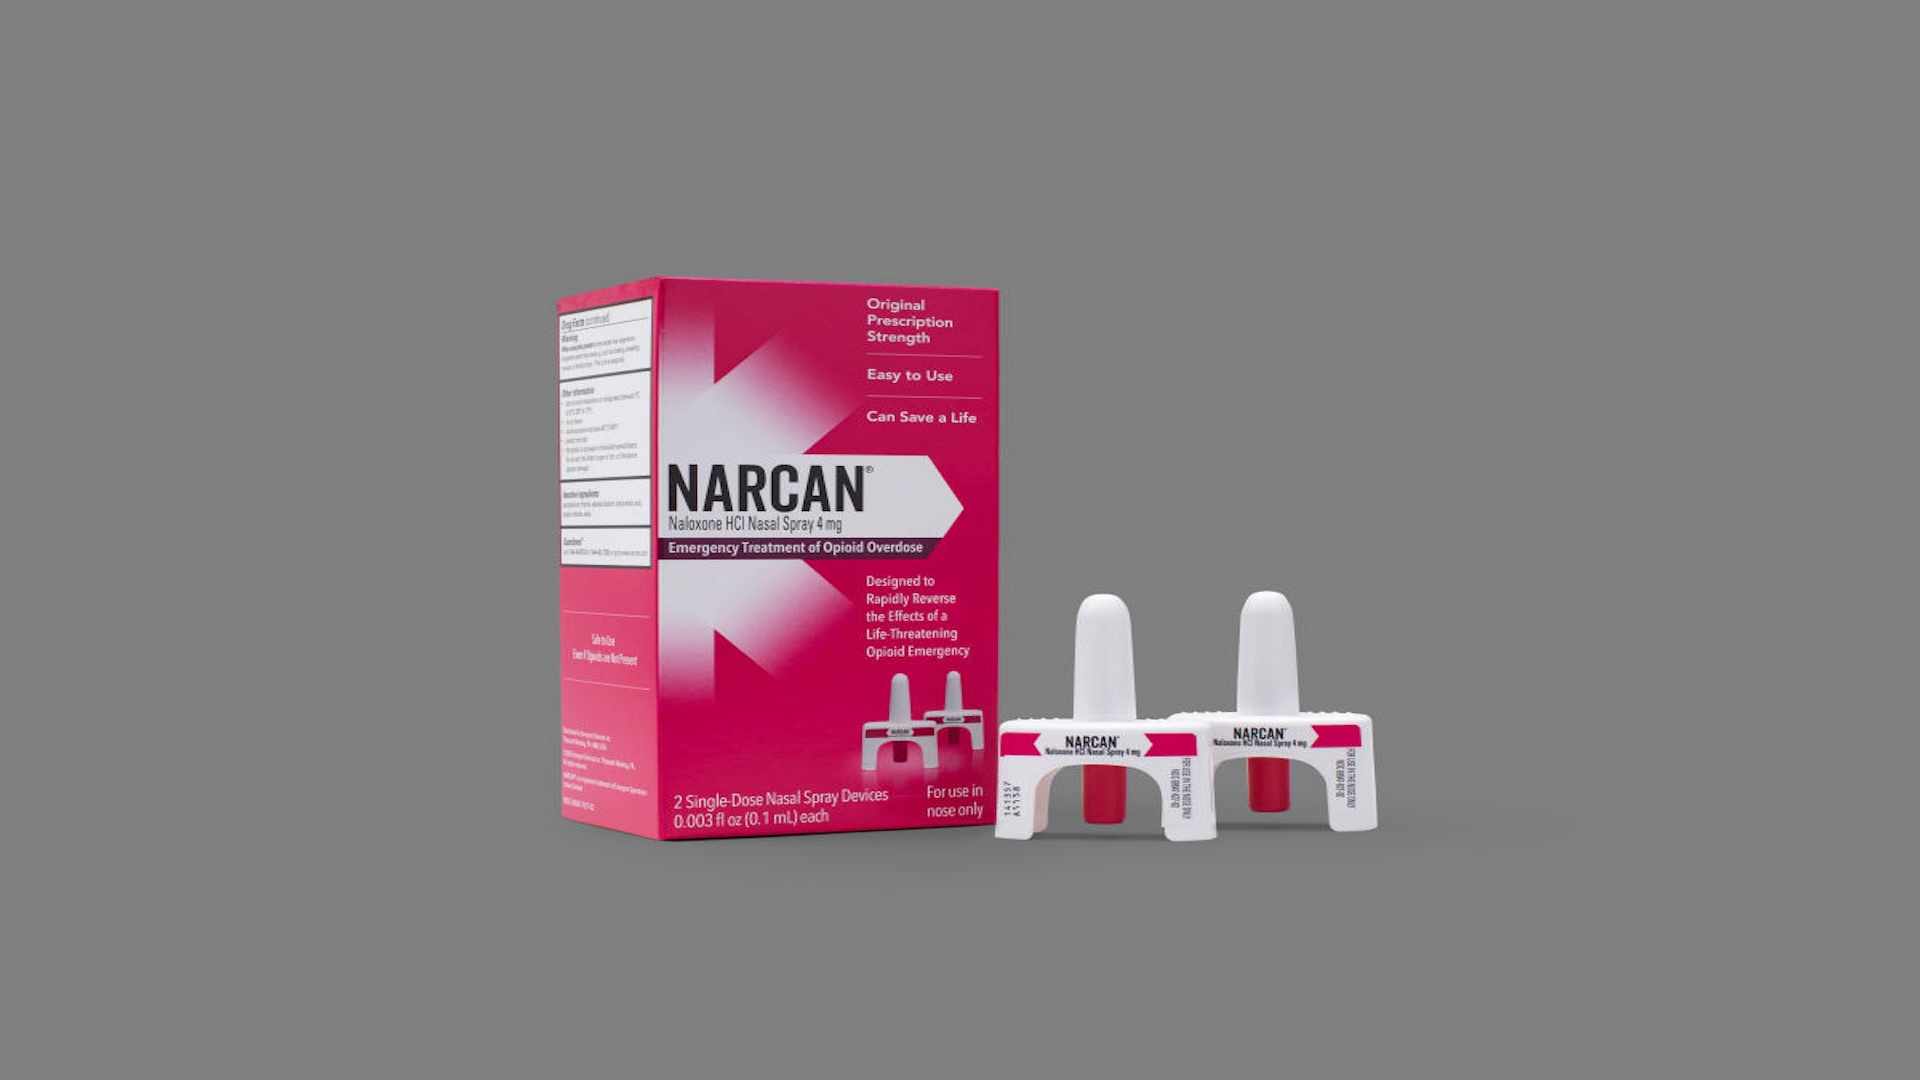 A photo of a box of NARCAN with two applicators sitting out of the packaging next to the box